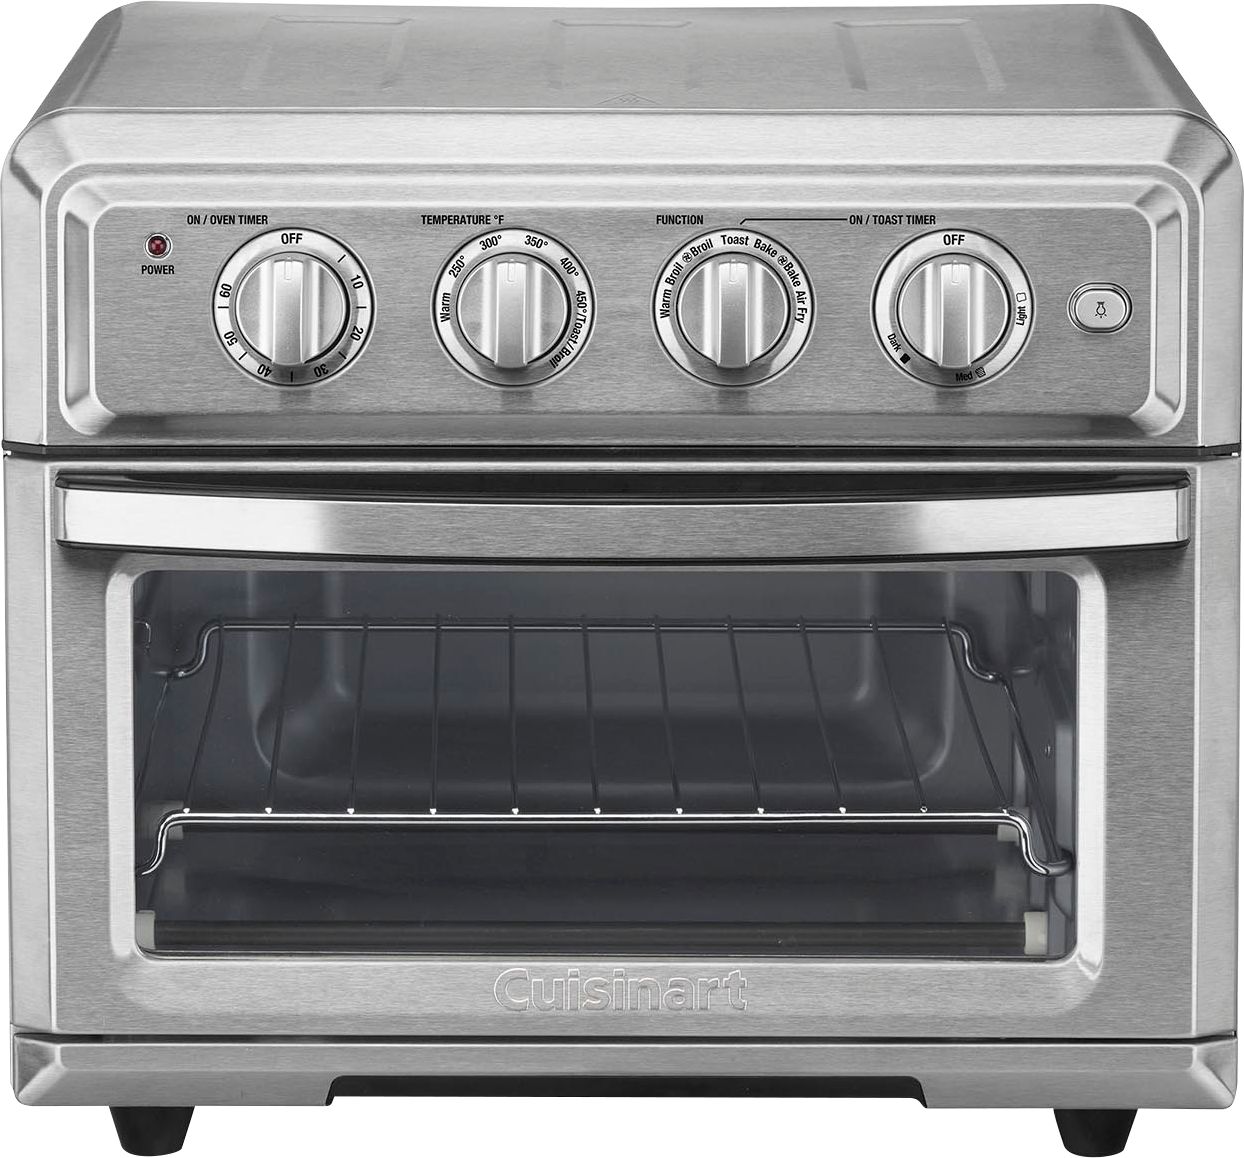 Cuisinart – Air Fryer Toaster Oven – Stainless Steel – Just $149.99 at Best Buy